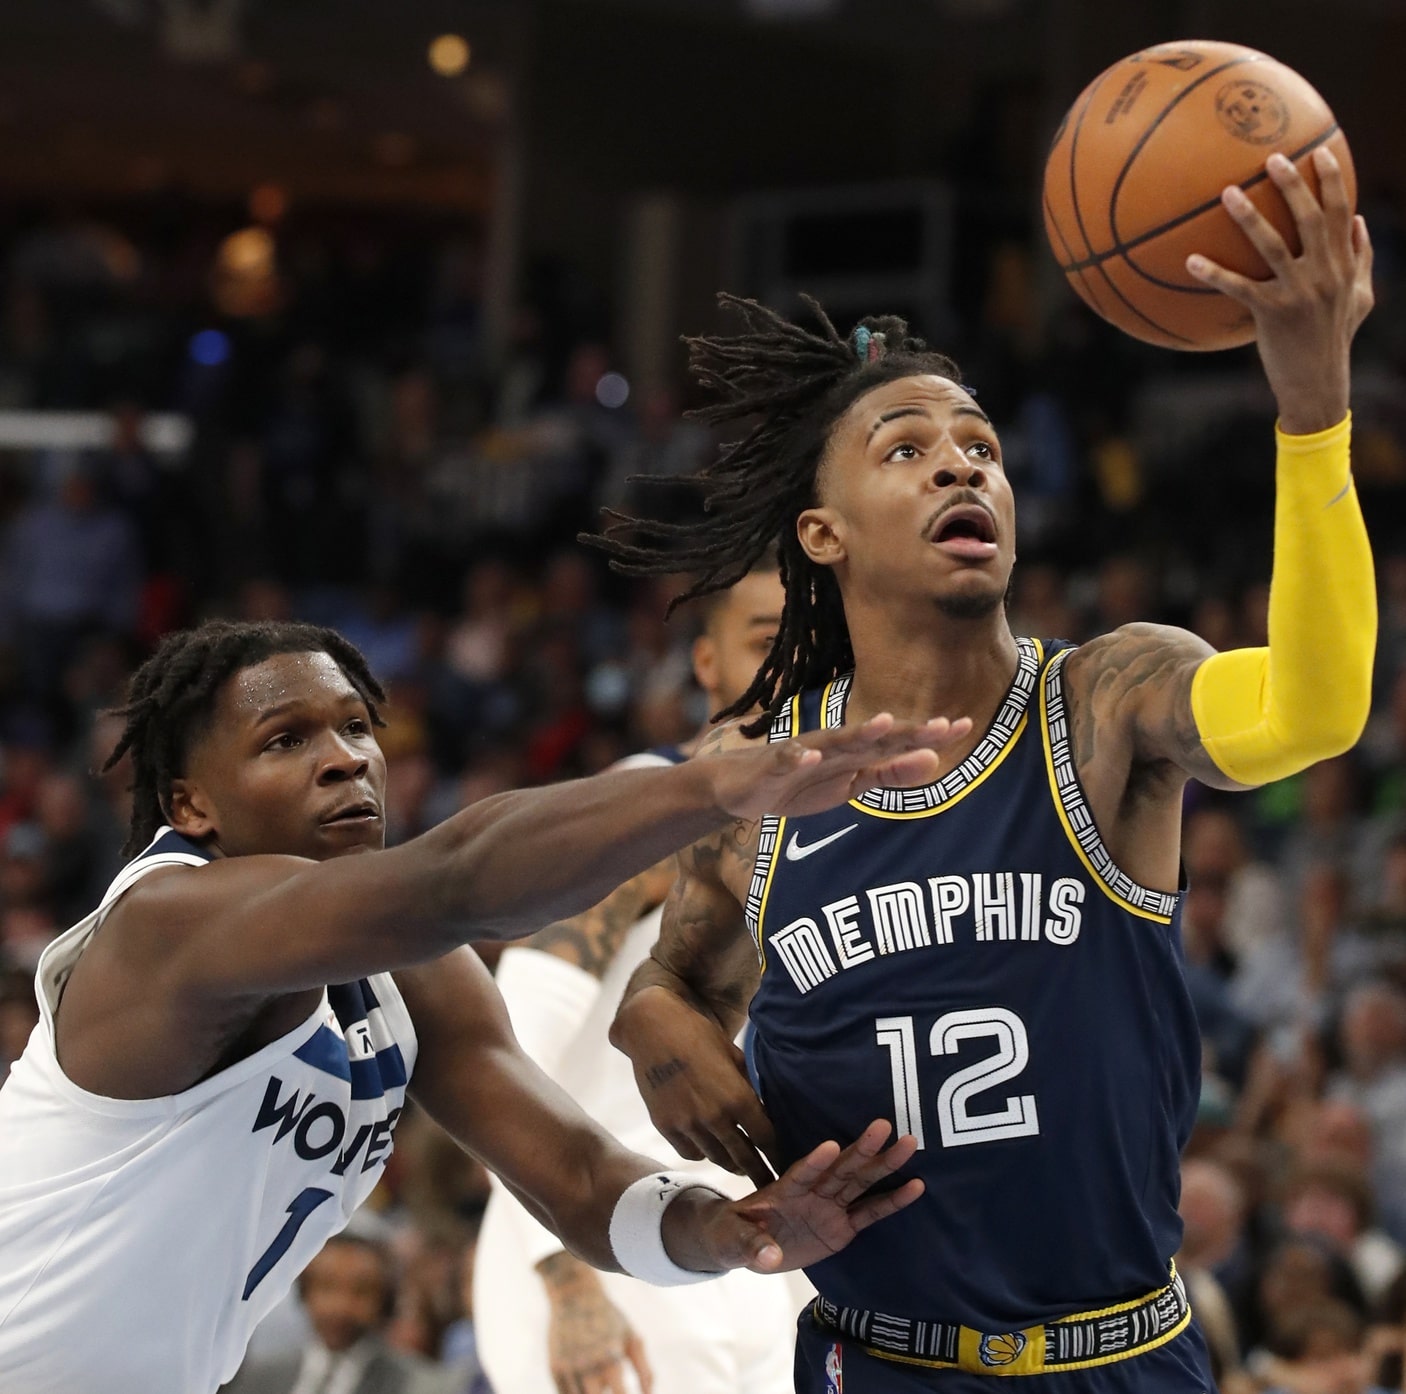 Memphis Grizzlies guard Ja Morant (12) is guarded by Minnesota Timberwolves forward Anthony Edwards (1) as he goes to shoot the ball during the second half of game two of the first round for the 2022 NBA playoffs.